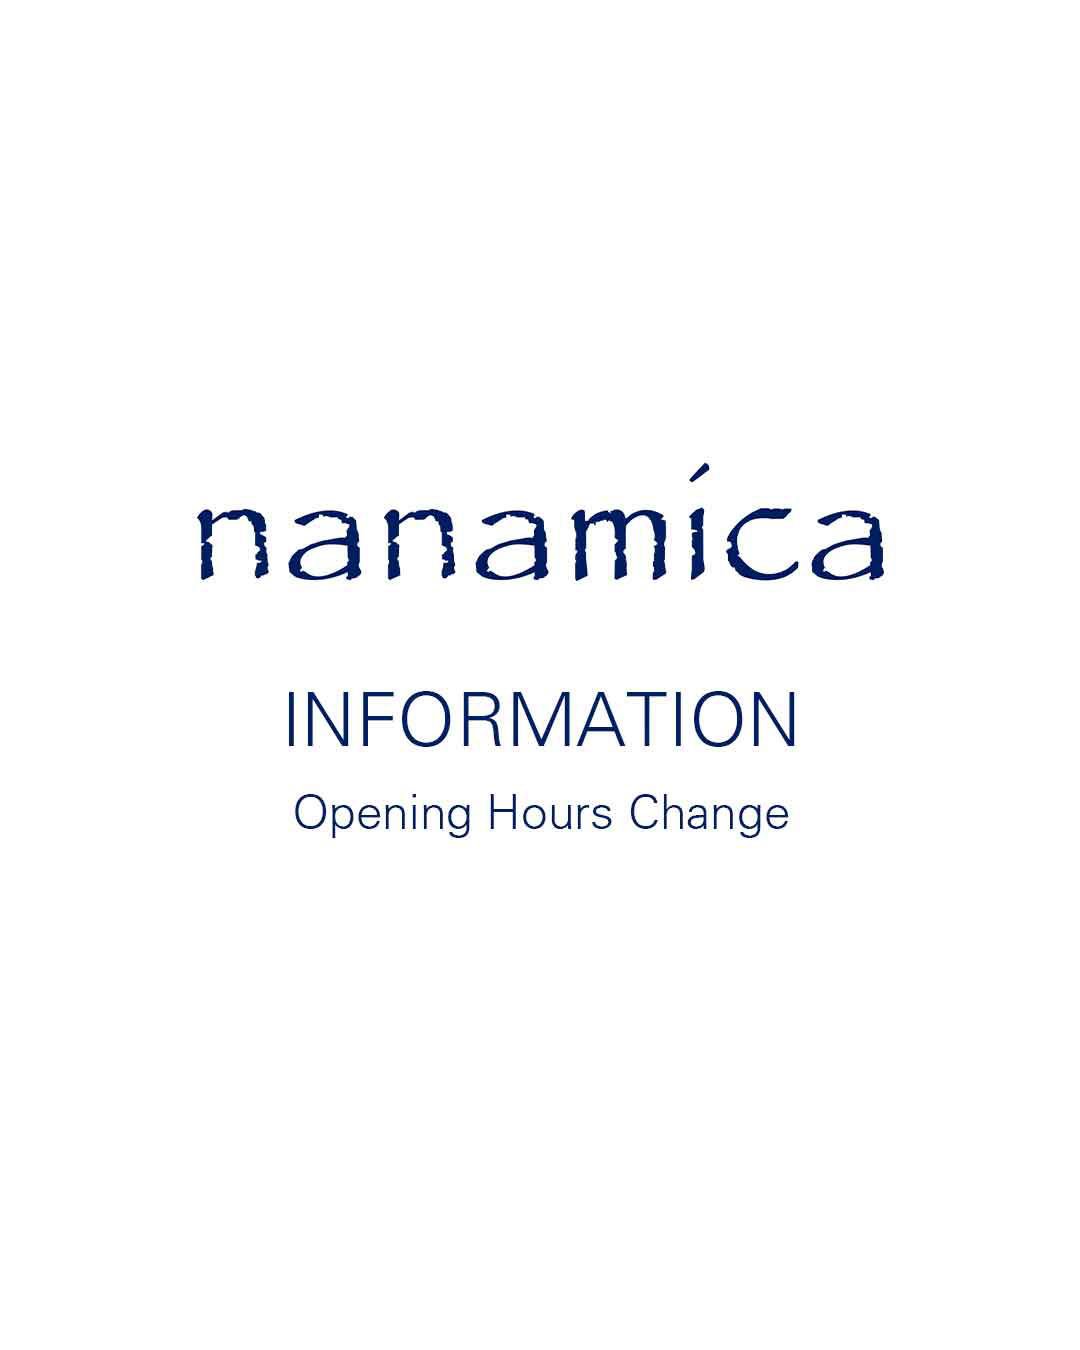 nanamica Opening Hours Change